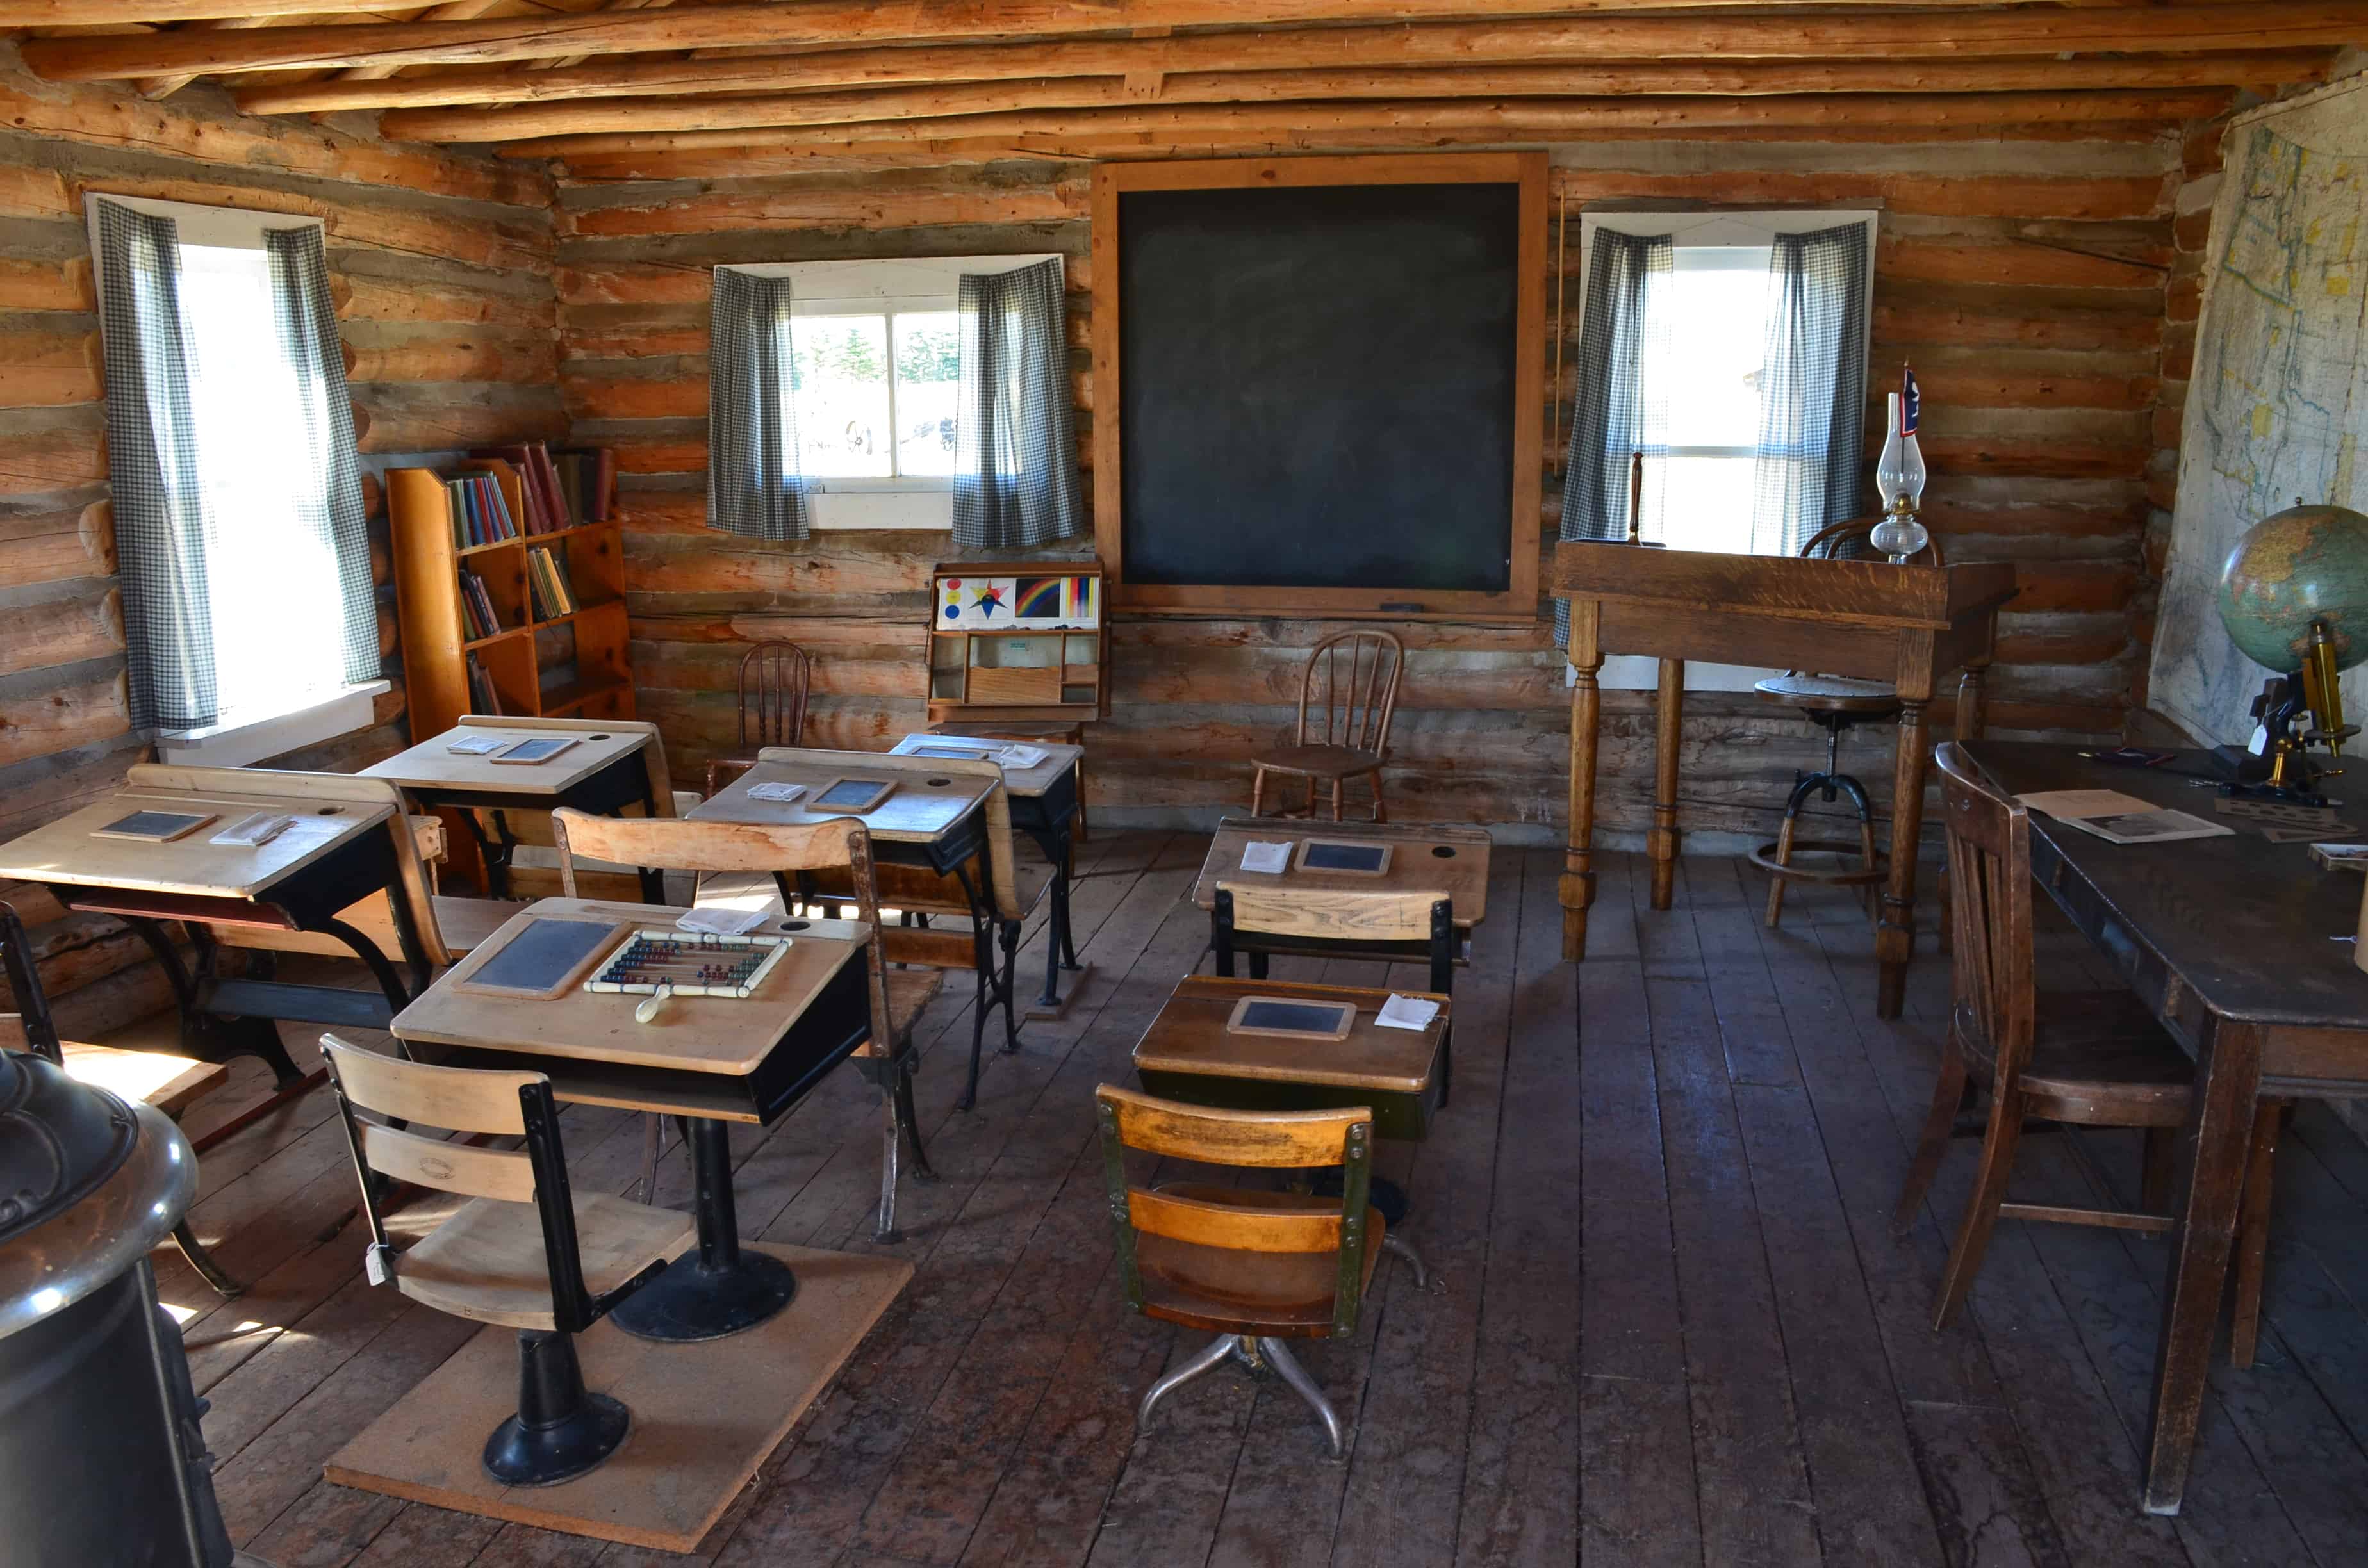 Schoolhouse from Chimney Rock Ranch at the pioneer village